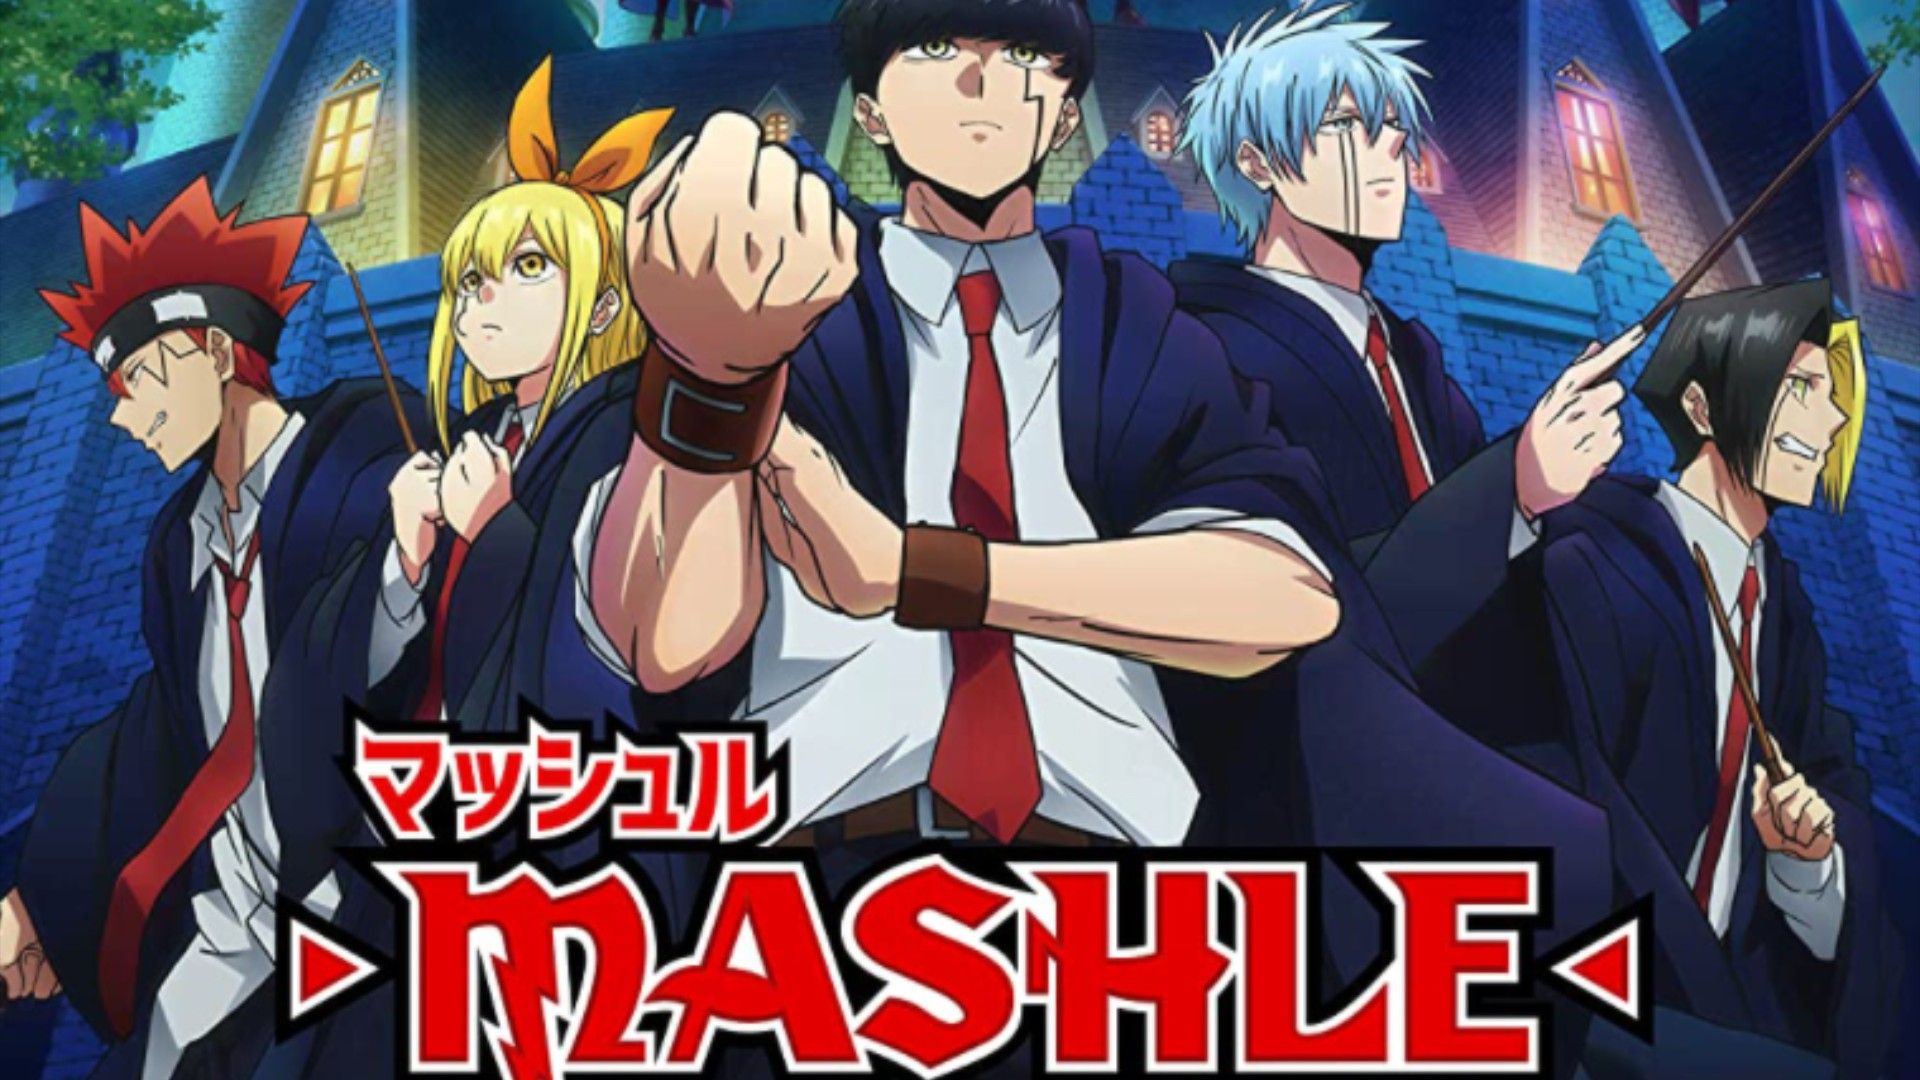 11th 'Mashle: Magic and Muscles' Anime Episode Previewed